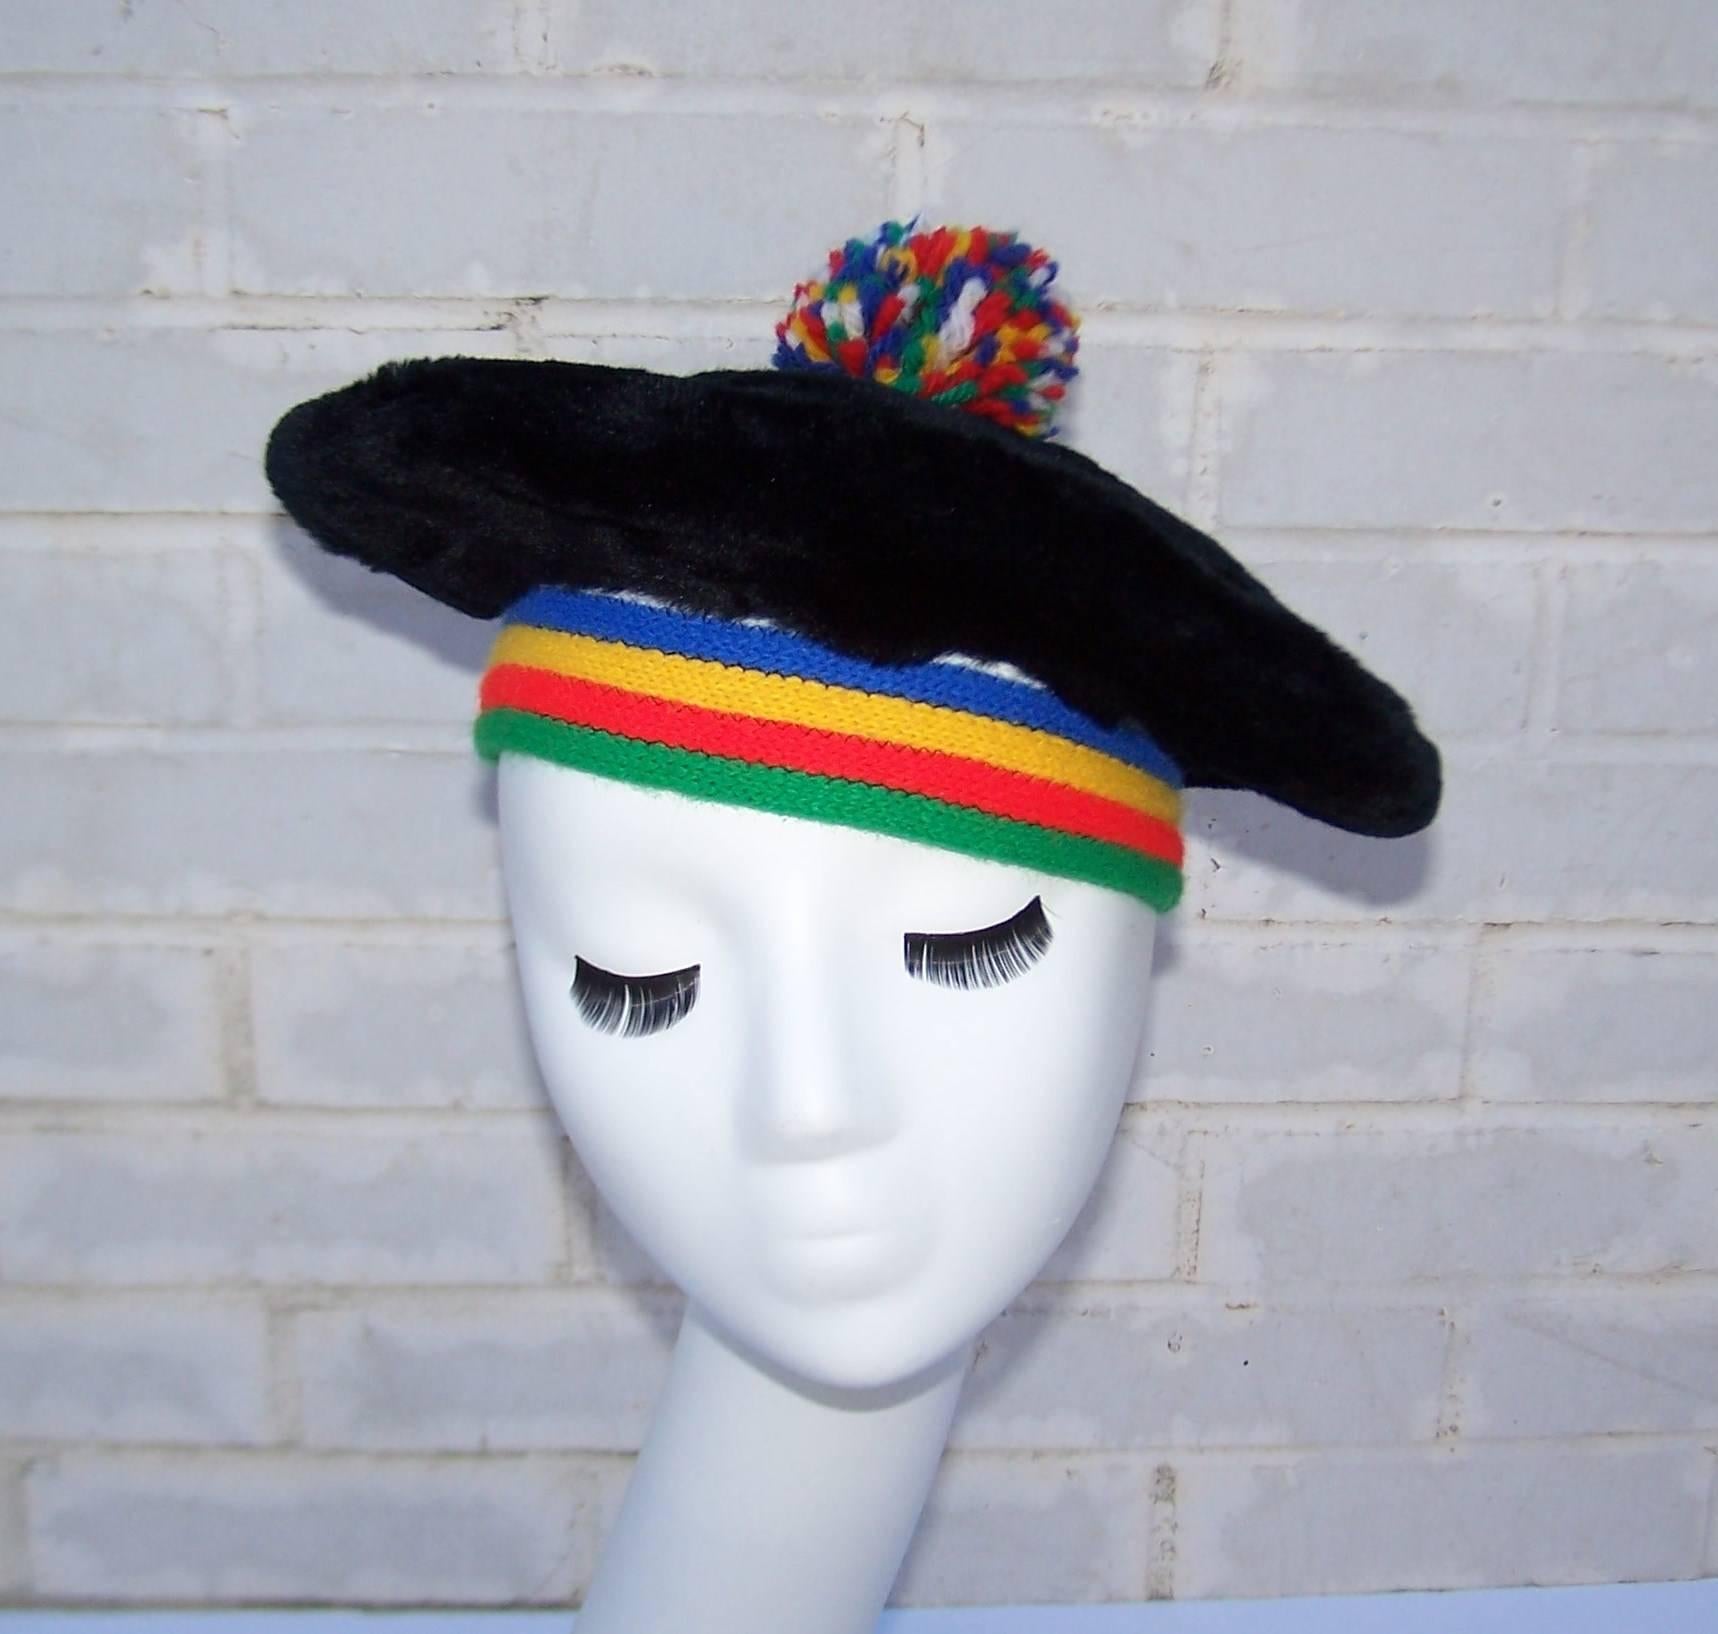 Love this 1970's era black faux fur beret with rainbow colored wool knit rim and a playful yarn pom pom.  Such a fun vintage accessory to add to a modern wardrobe with the added bonus of warmth on a cold day.  Excellent vintage